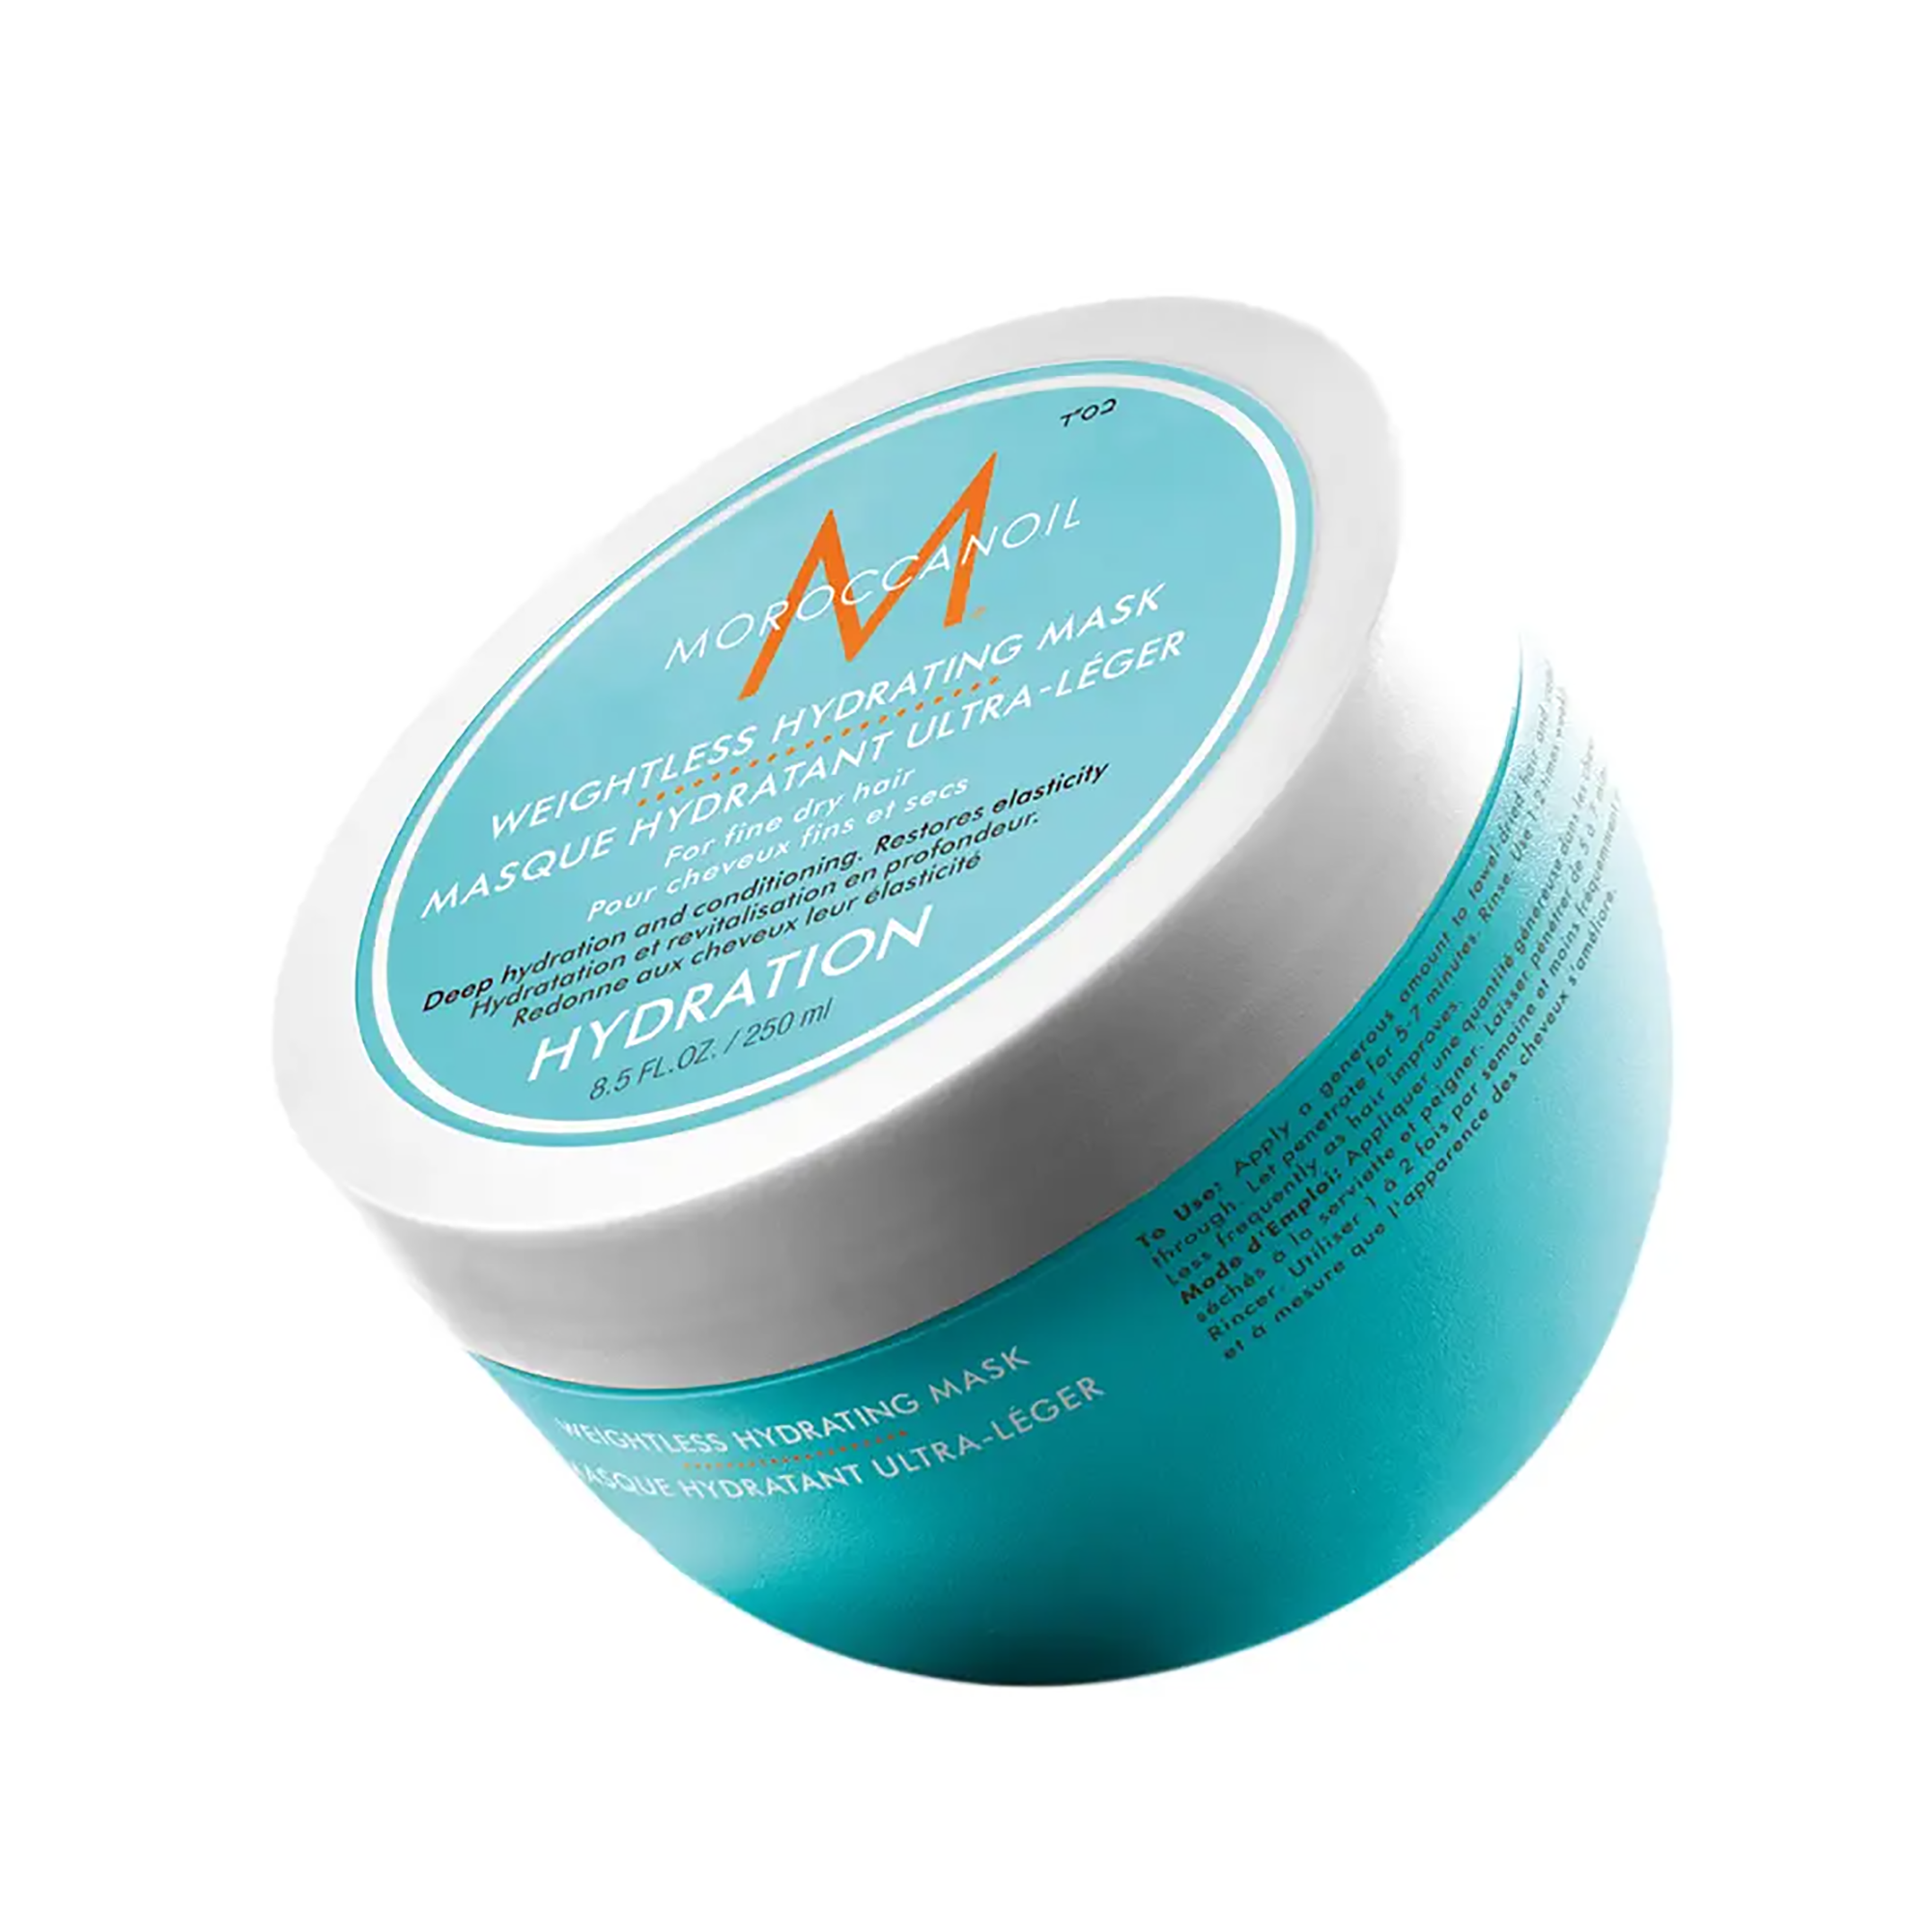 MoroccanOil Weightless Hydrating Mask / 8.5OZ